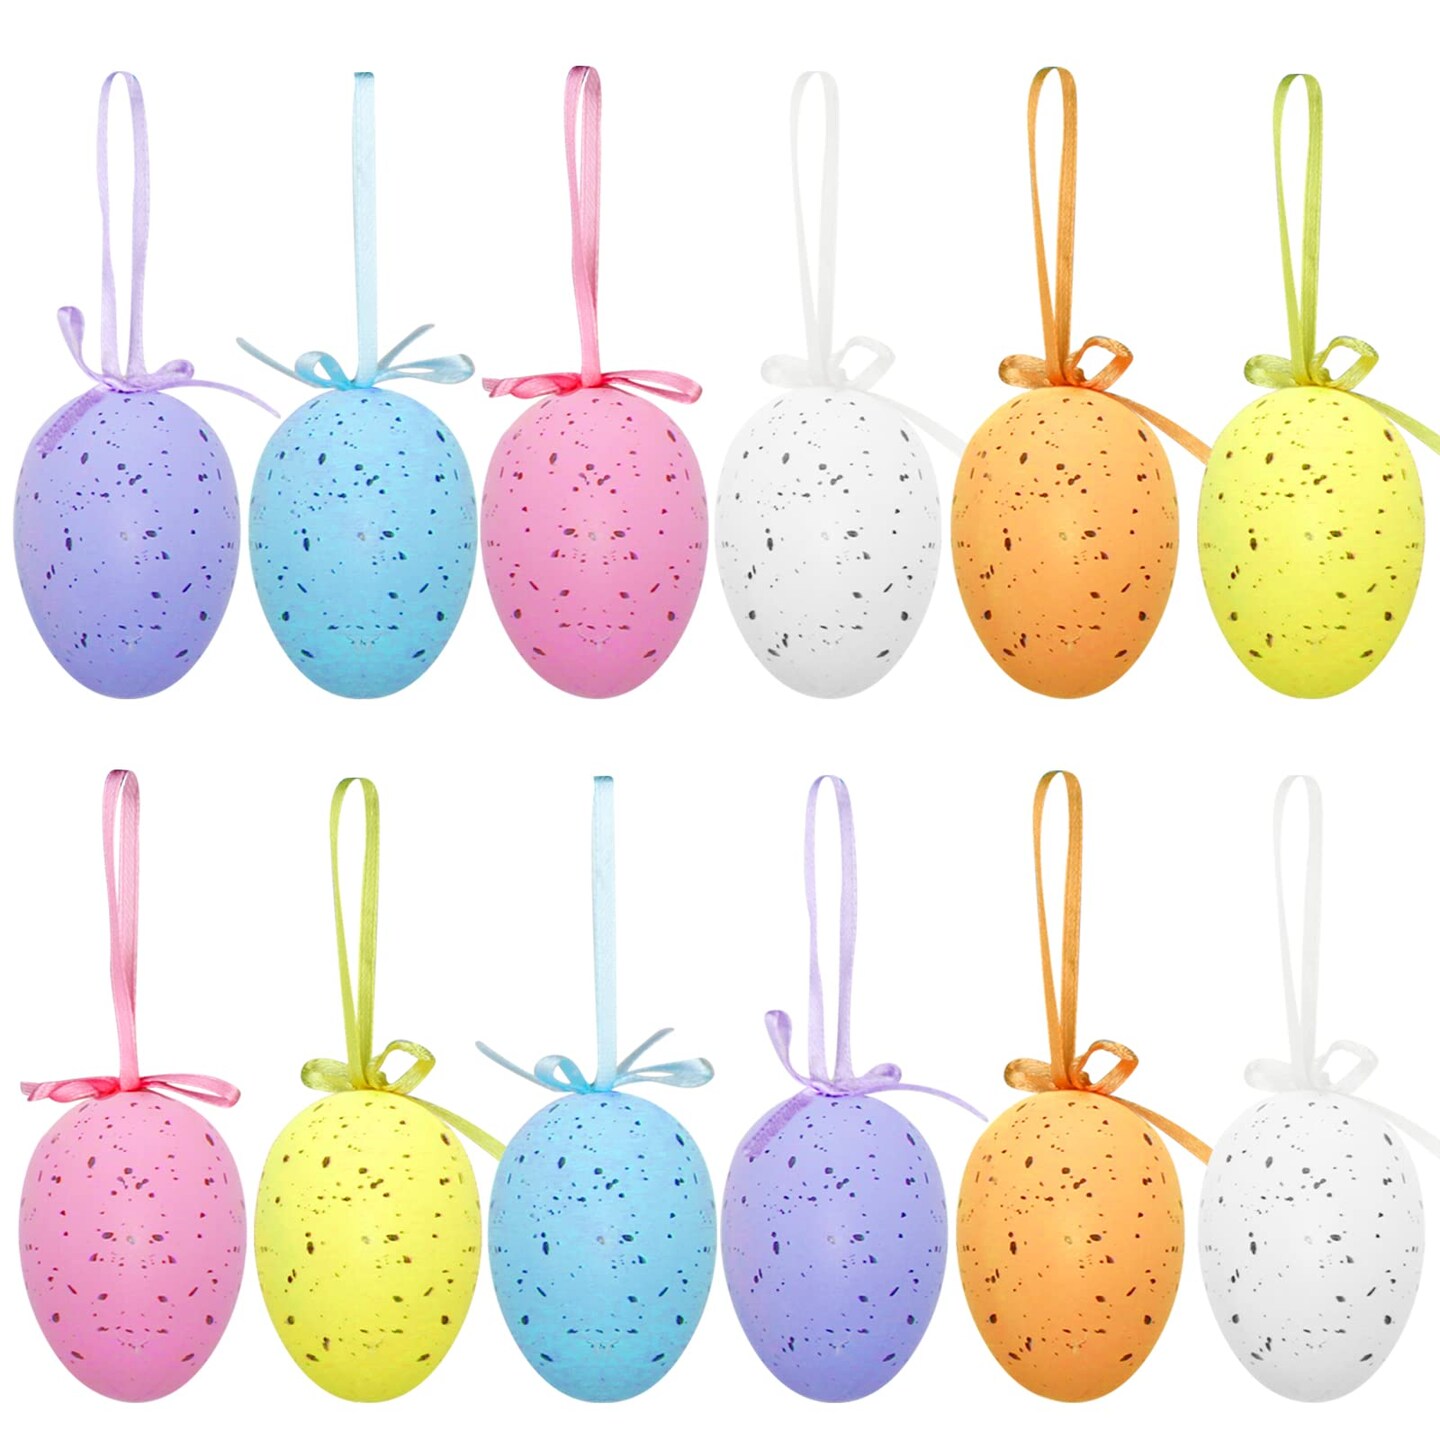 12Pcs Easter Eggs Decorations Hanging Ornaments Colorful for Easter Basket Tree Decor Party Favors Supplies Home